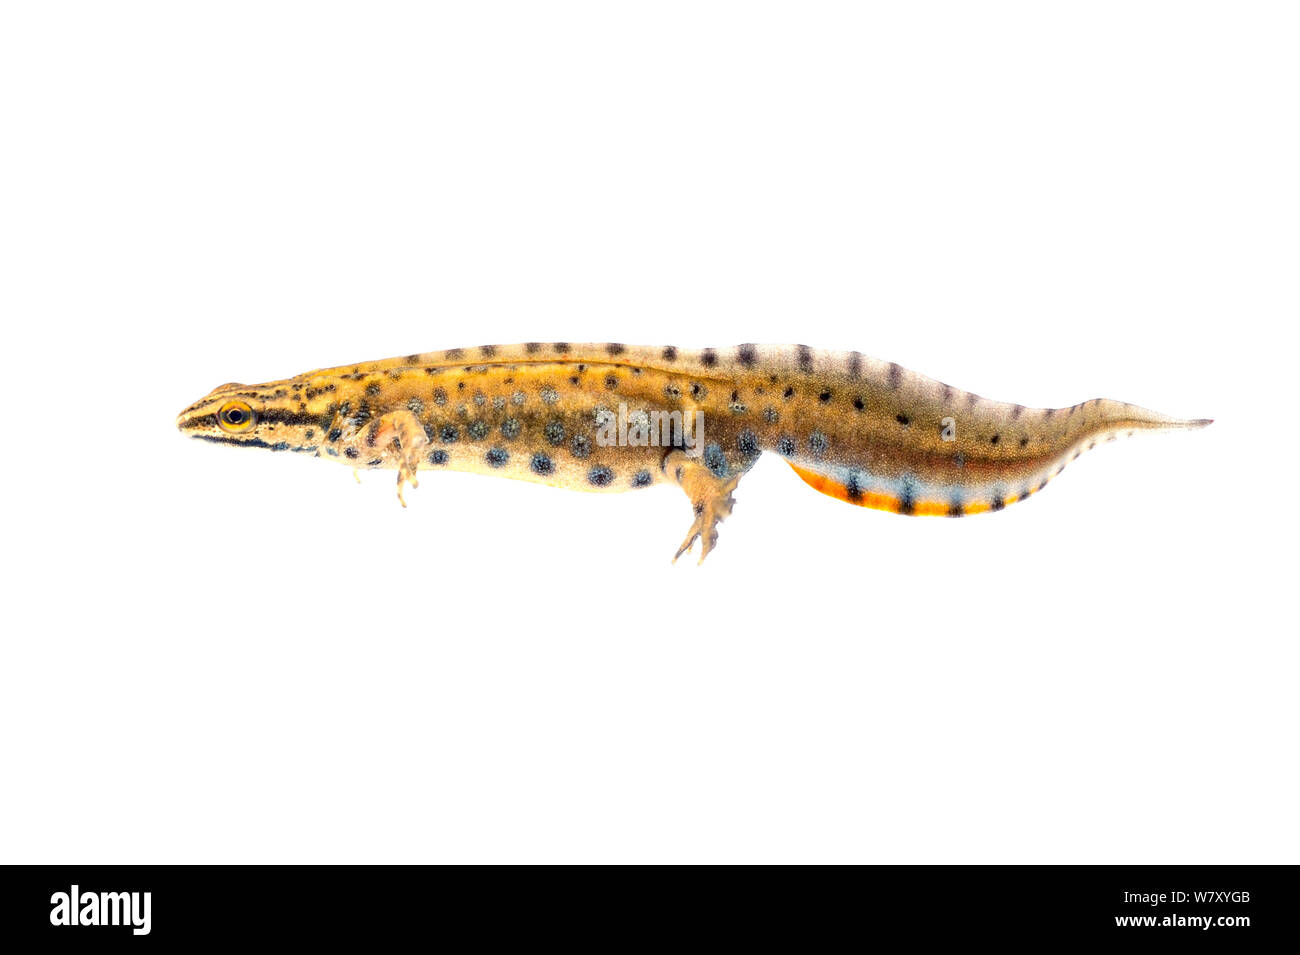 Southern smooth newt (Lissotriton vulgaris meridionalis) under water, Slovenia, Europe, March. meetyourneighbours.net project Stock Photo